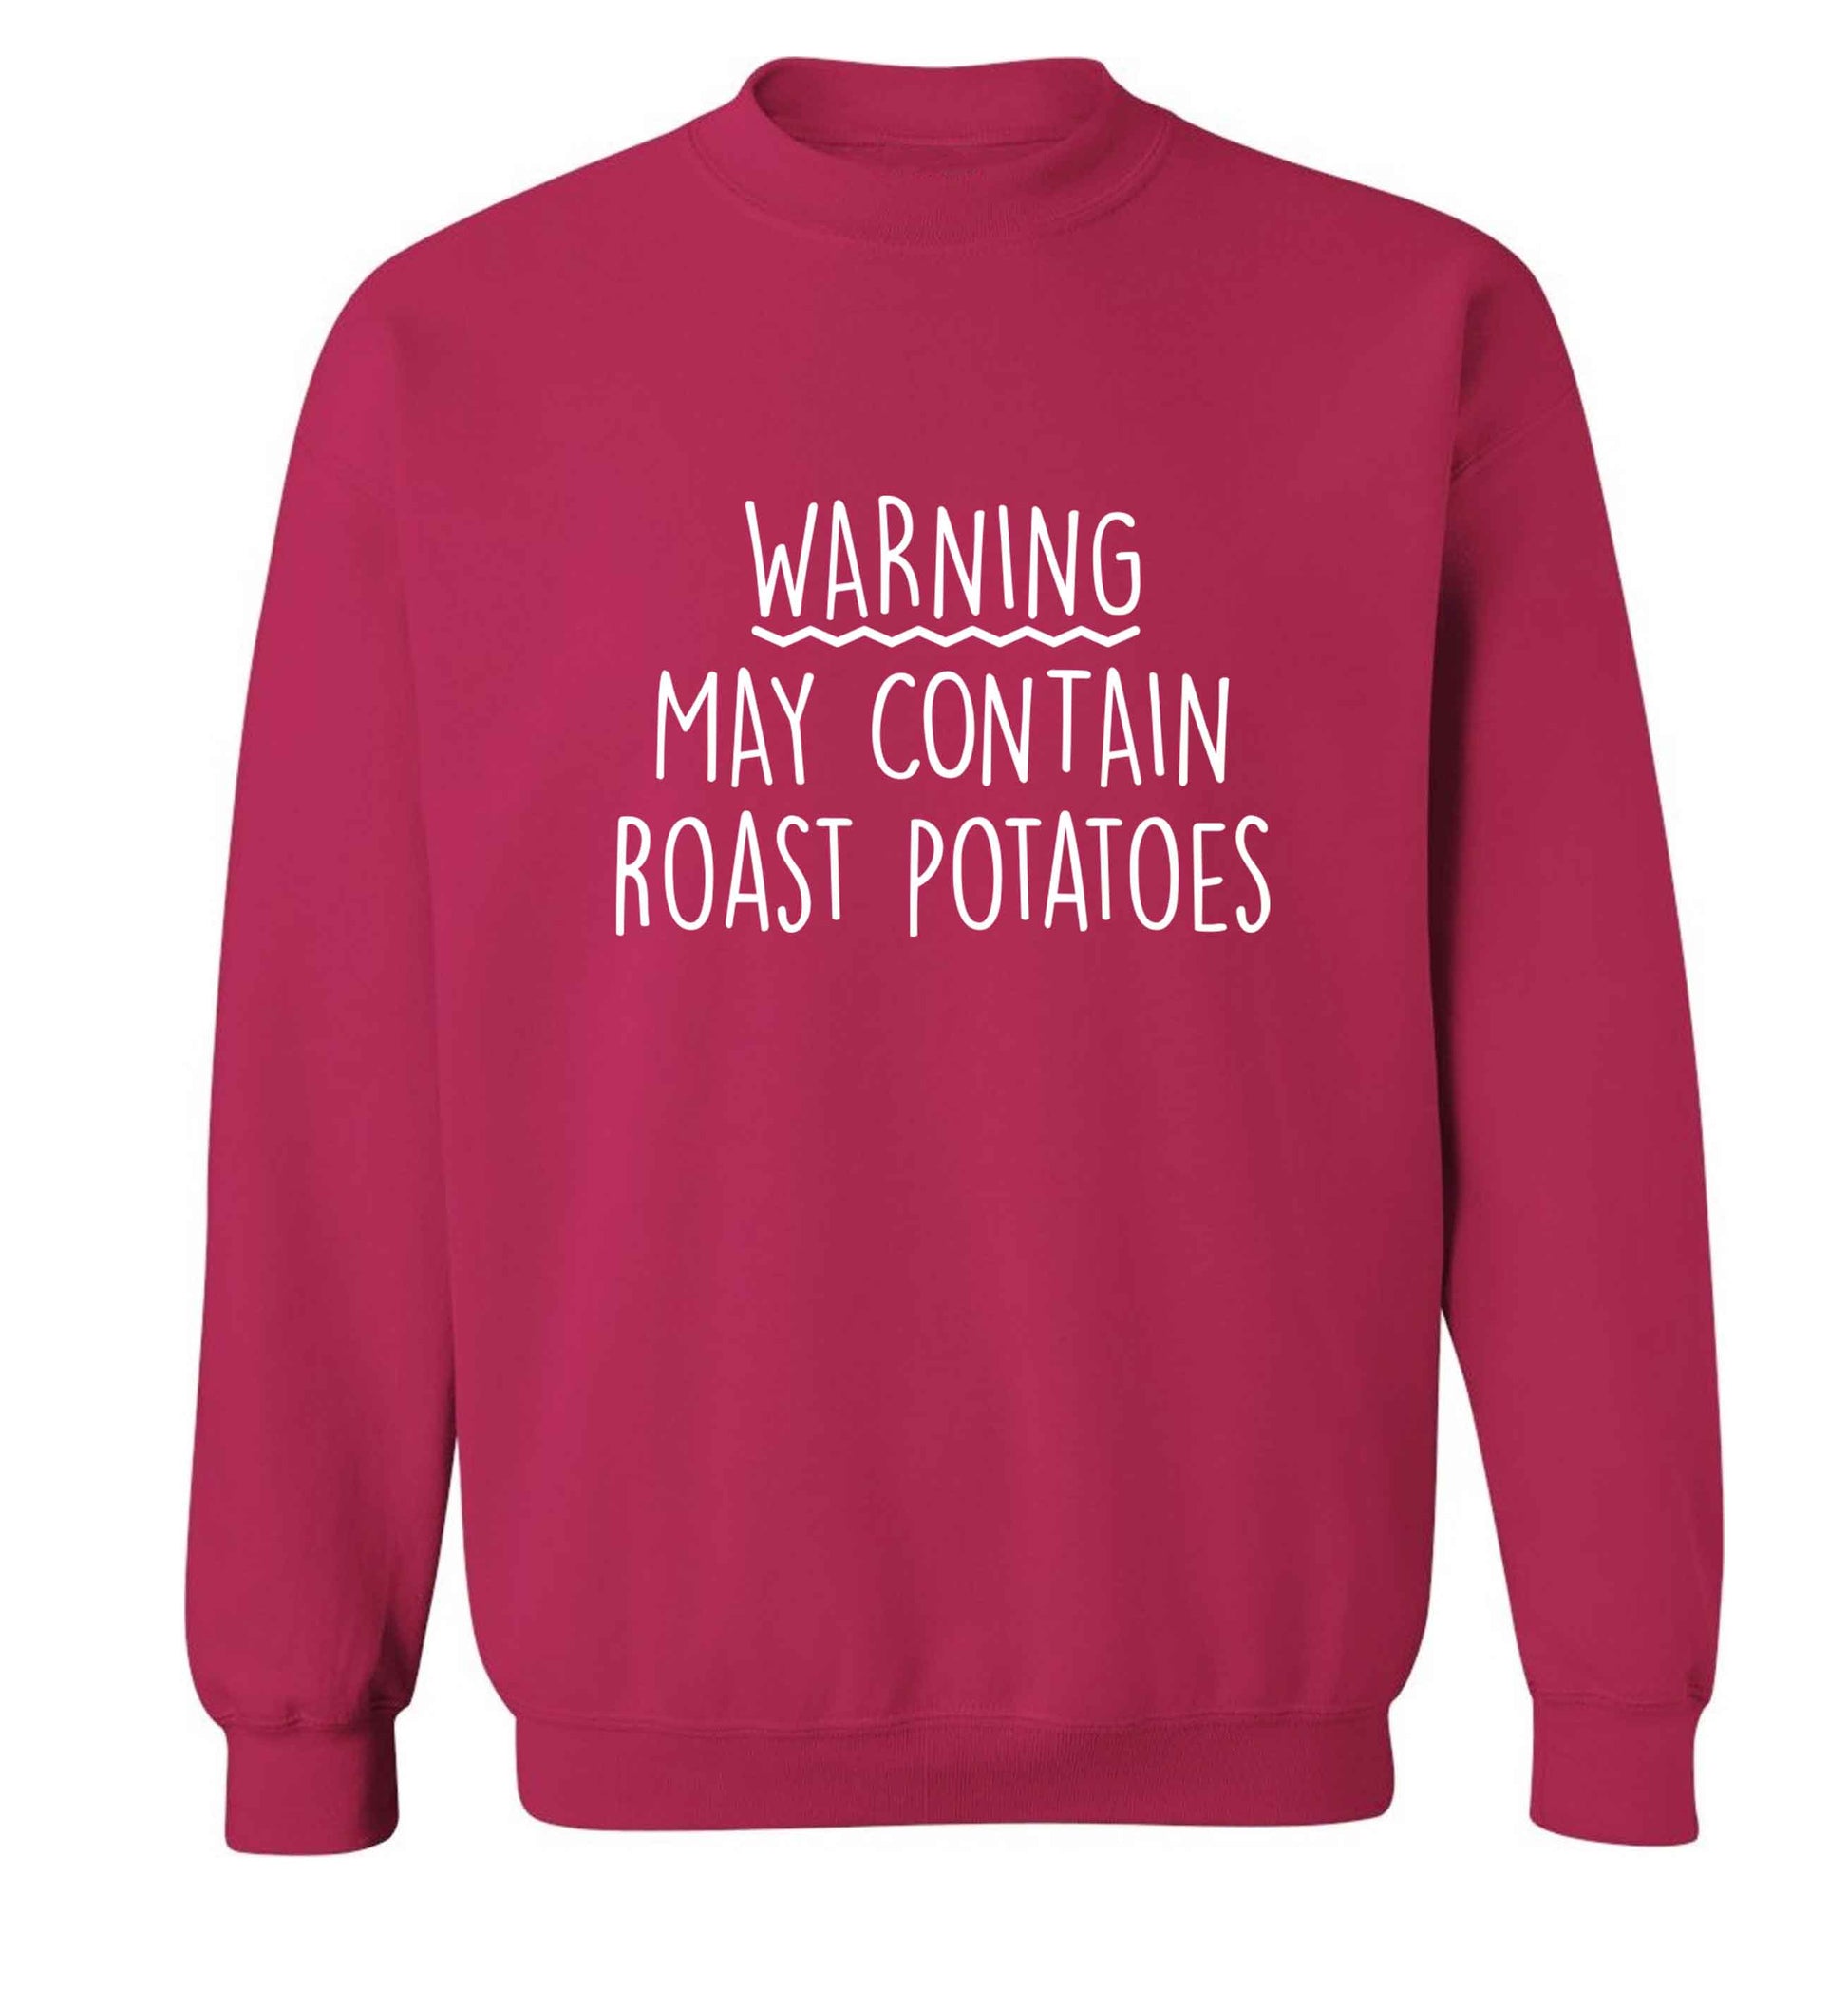 Warning may containg roast potatoes adult's unisex pink sweater 2XL